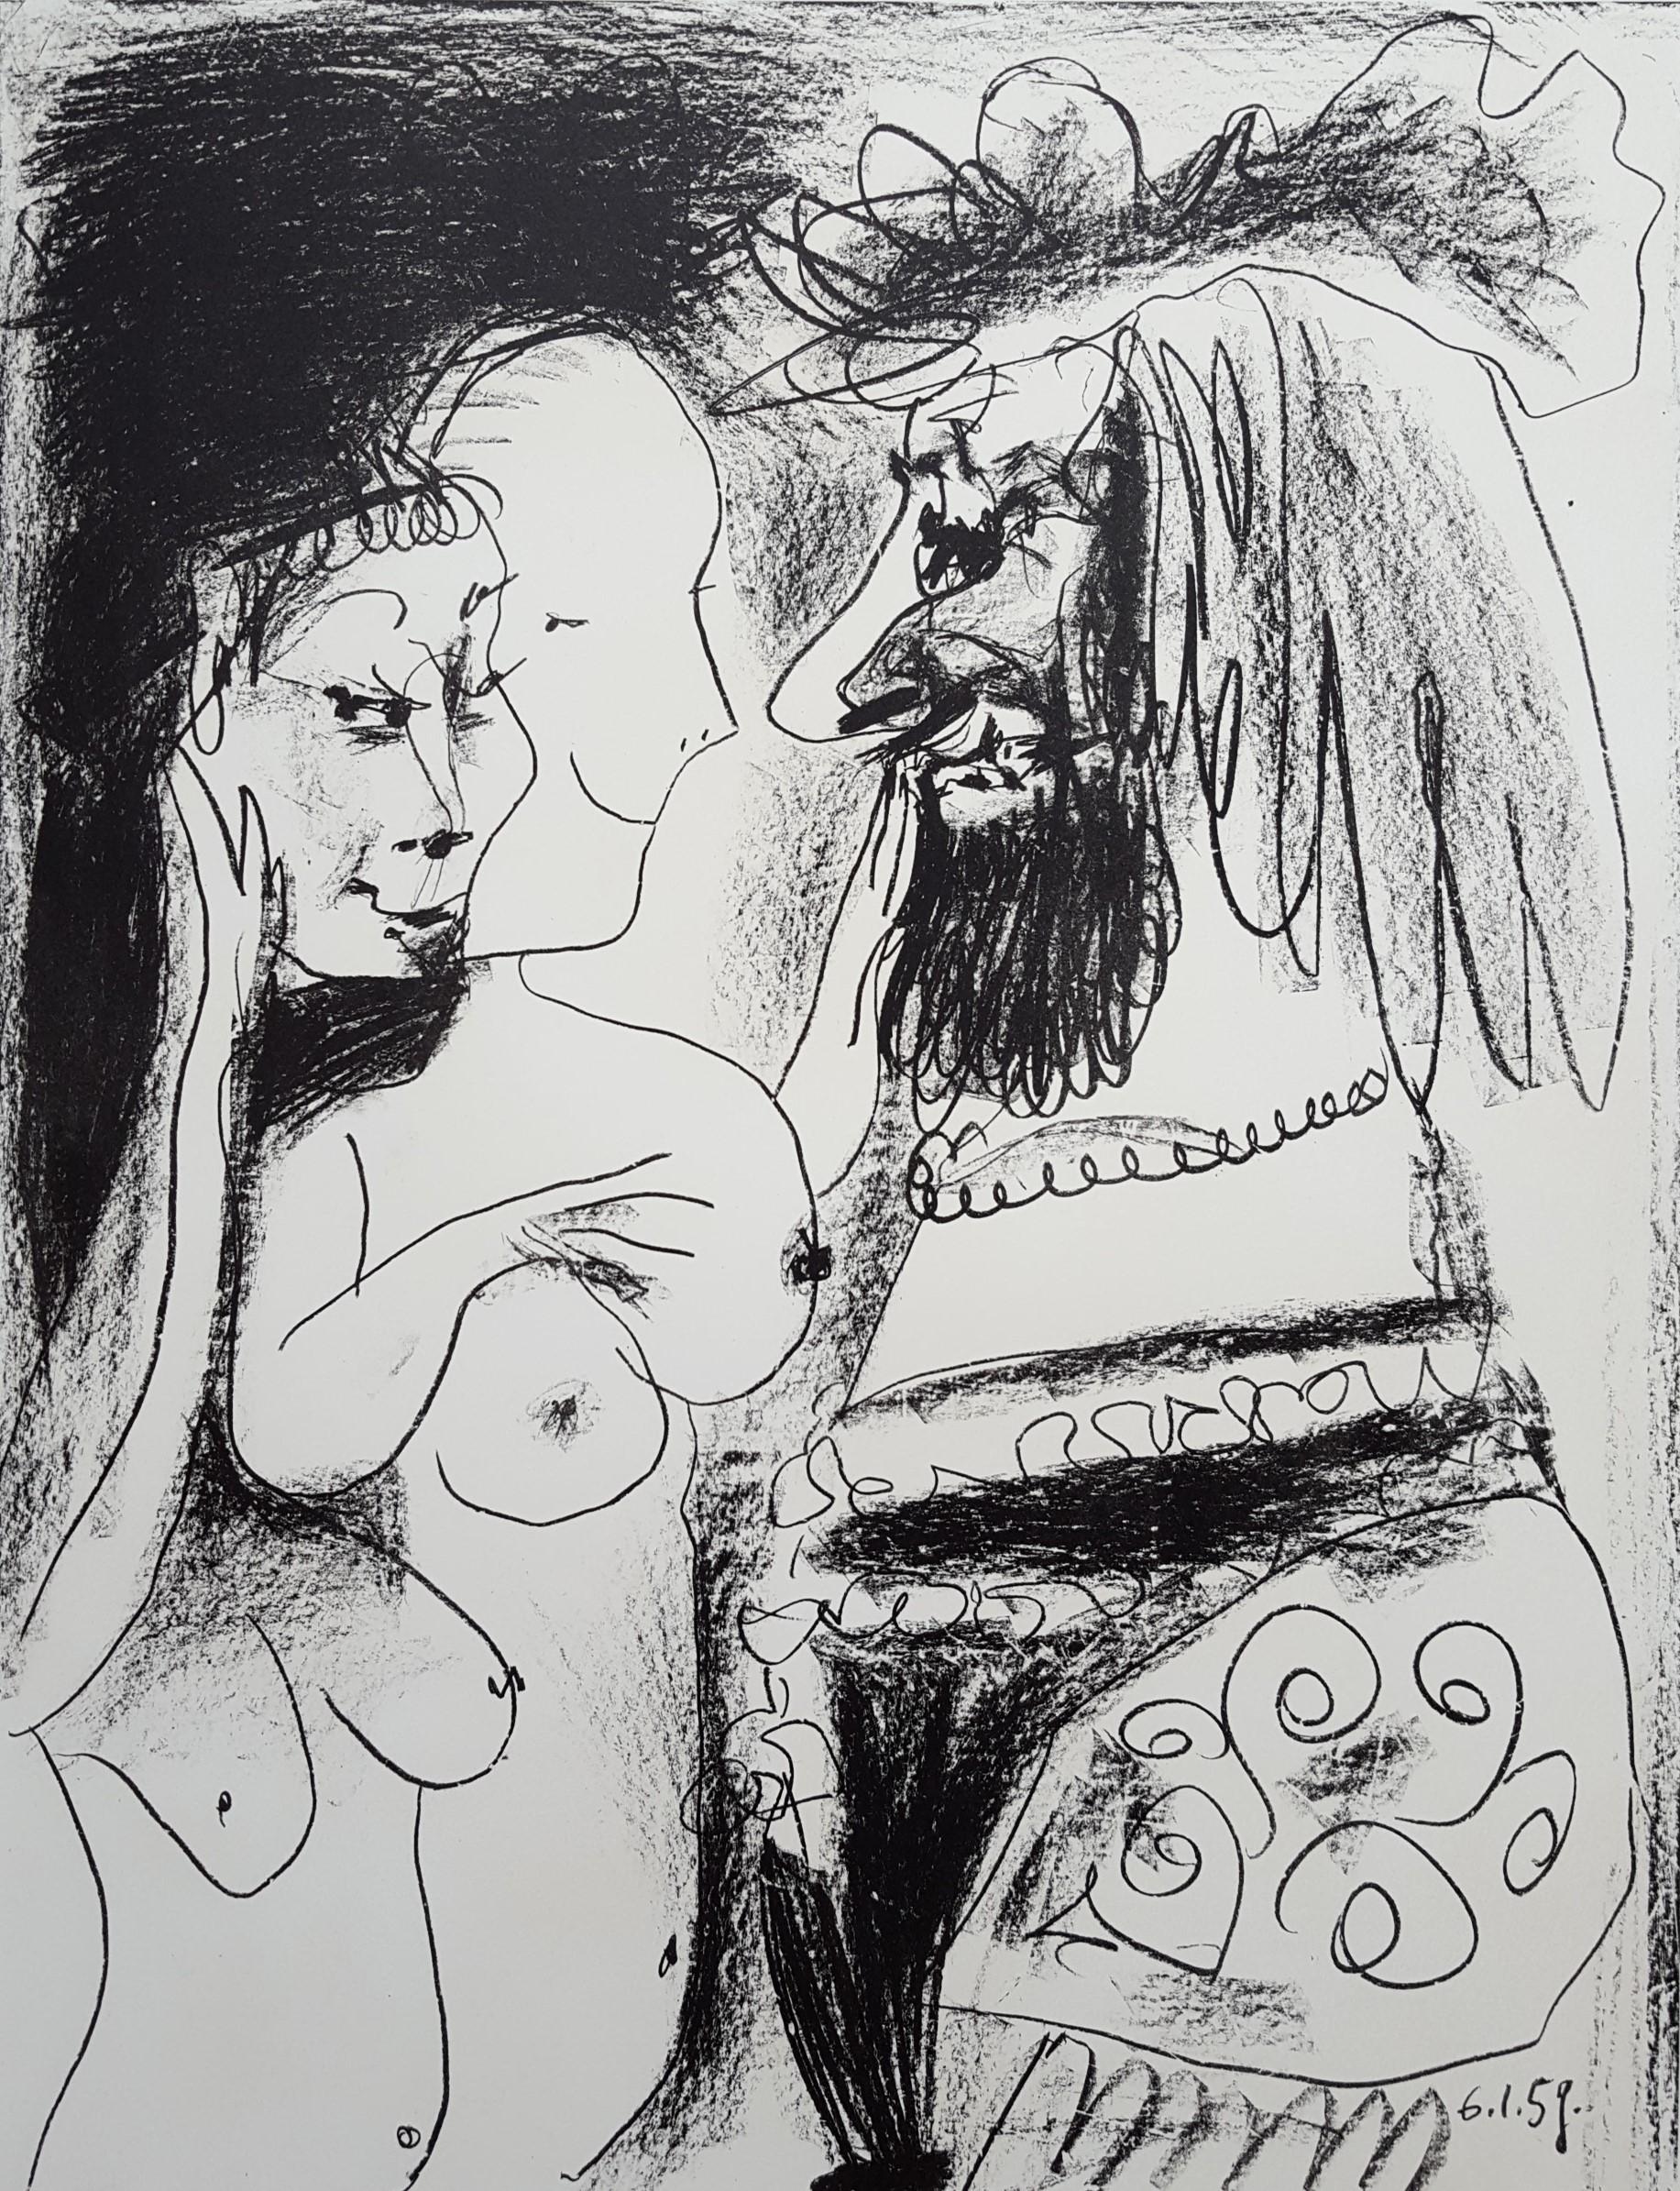 Pablo Picasso Figurative Print - Le Vieux Roi (The Old King) - signed in blue crayon, ed. 200